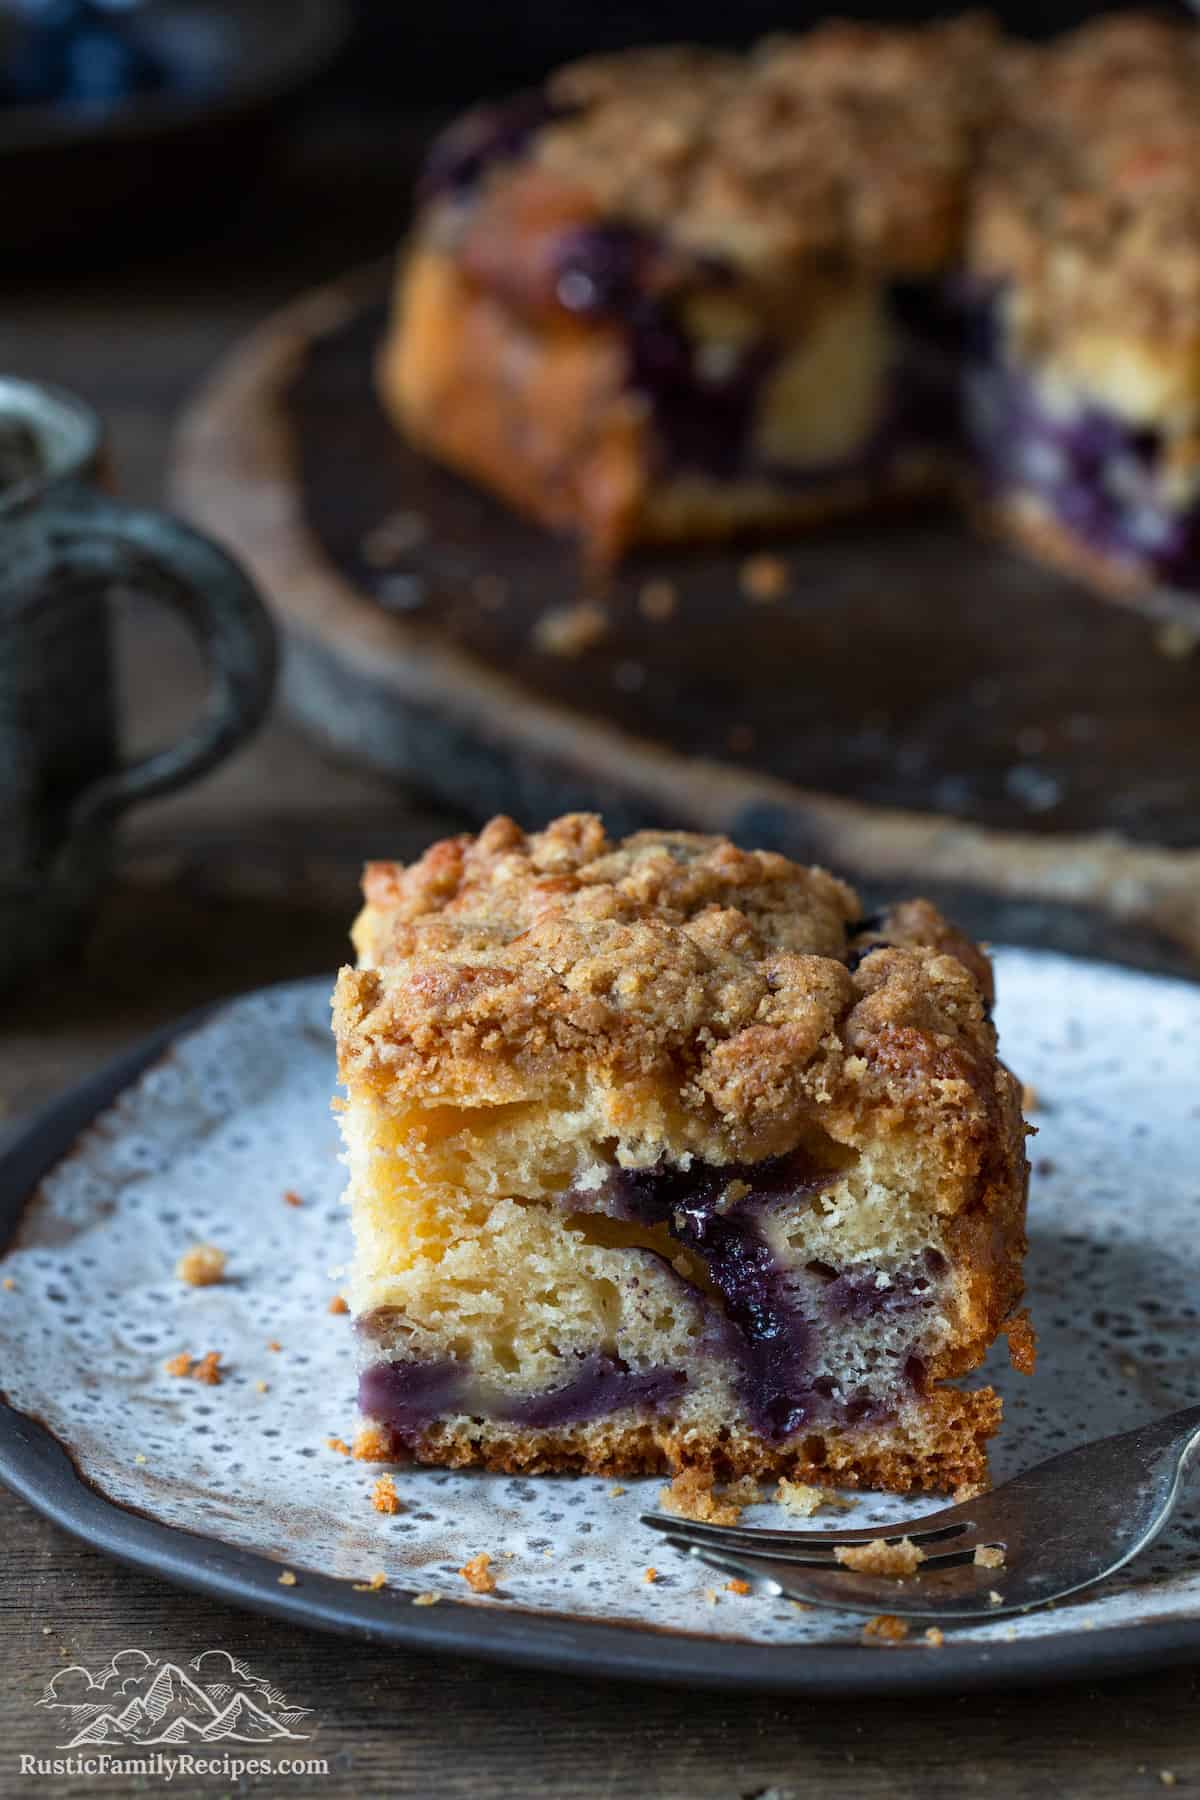 A slice of blueberry buckle on a plate.